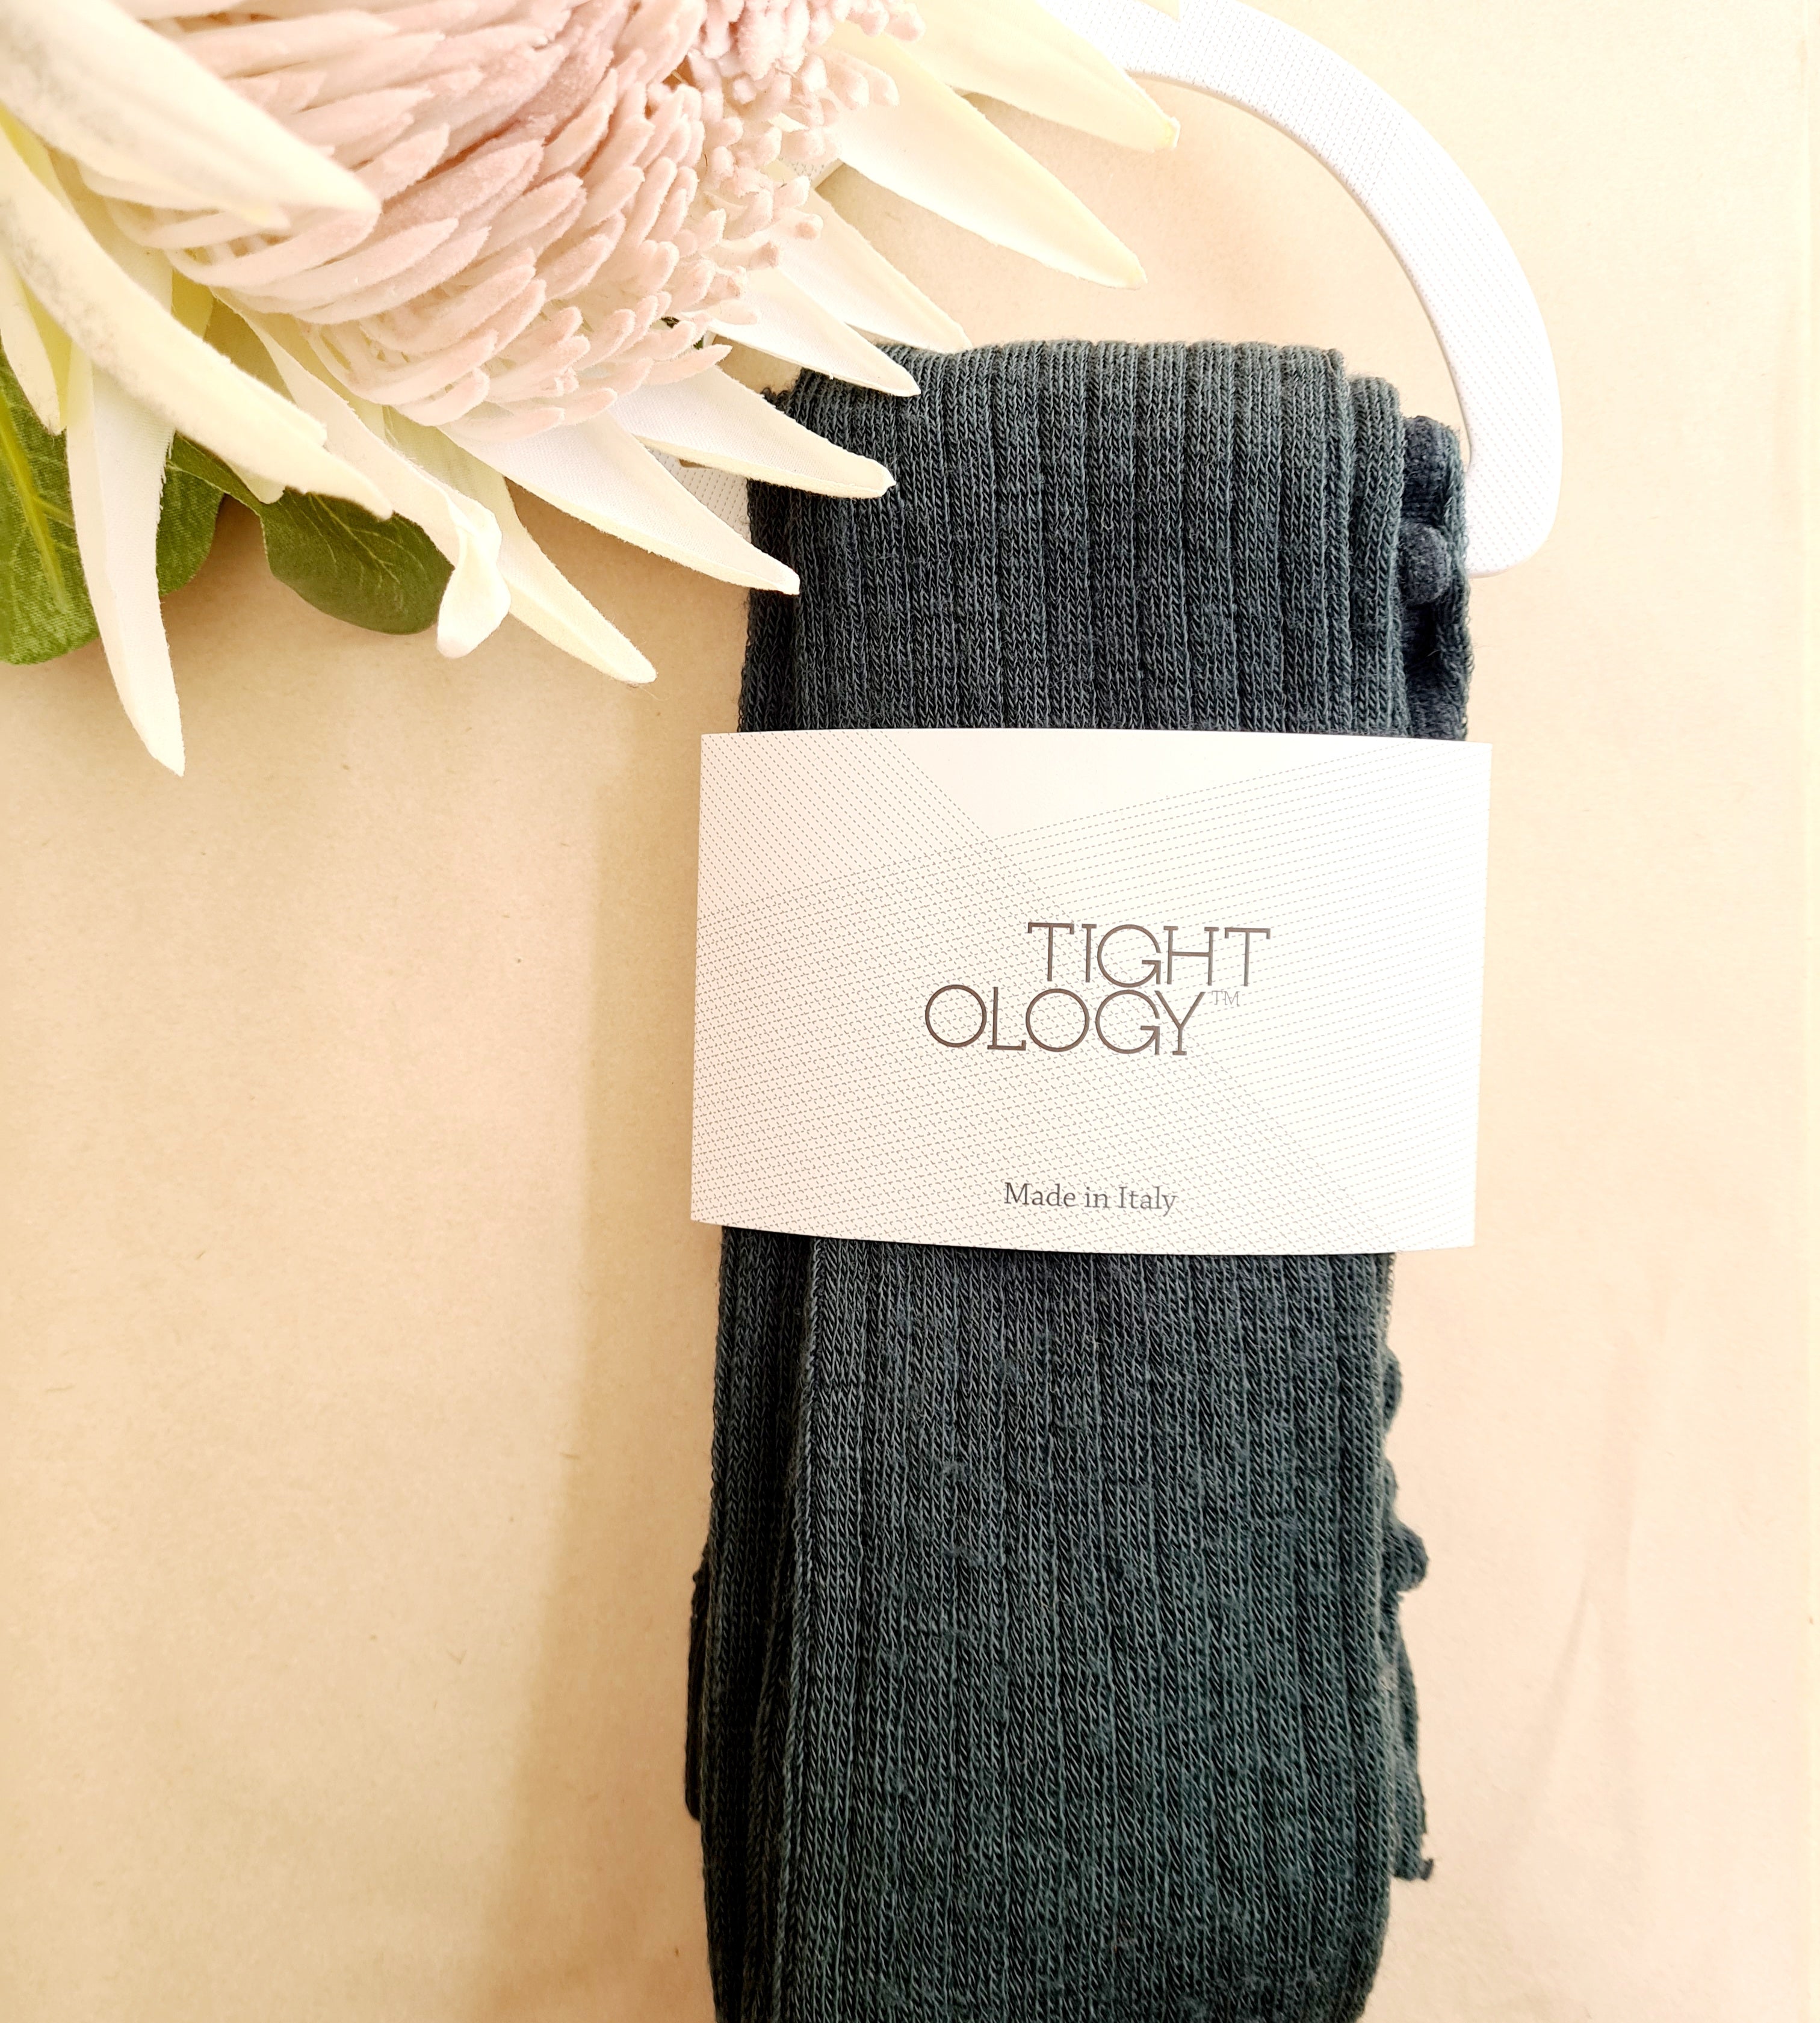 Staple' Merino Wool Tights - Tightology – The Spotted Quoll